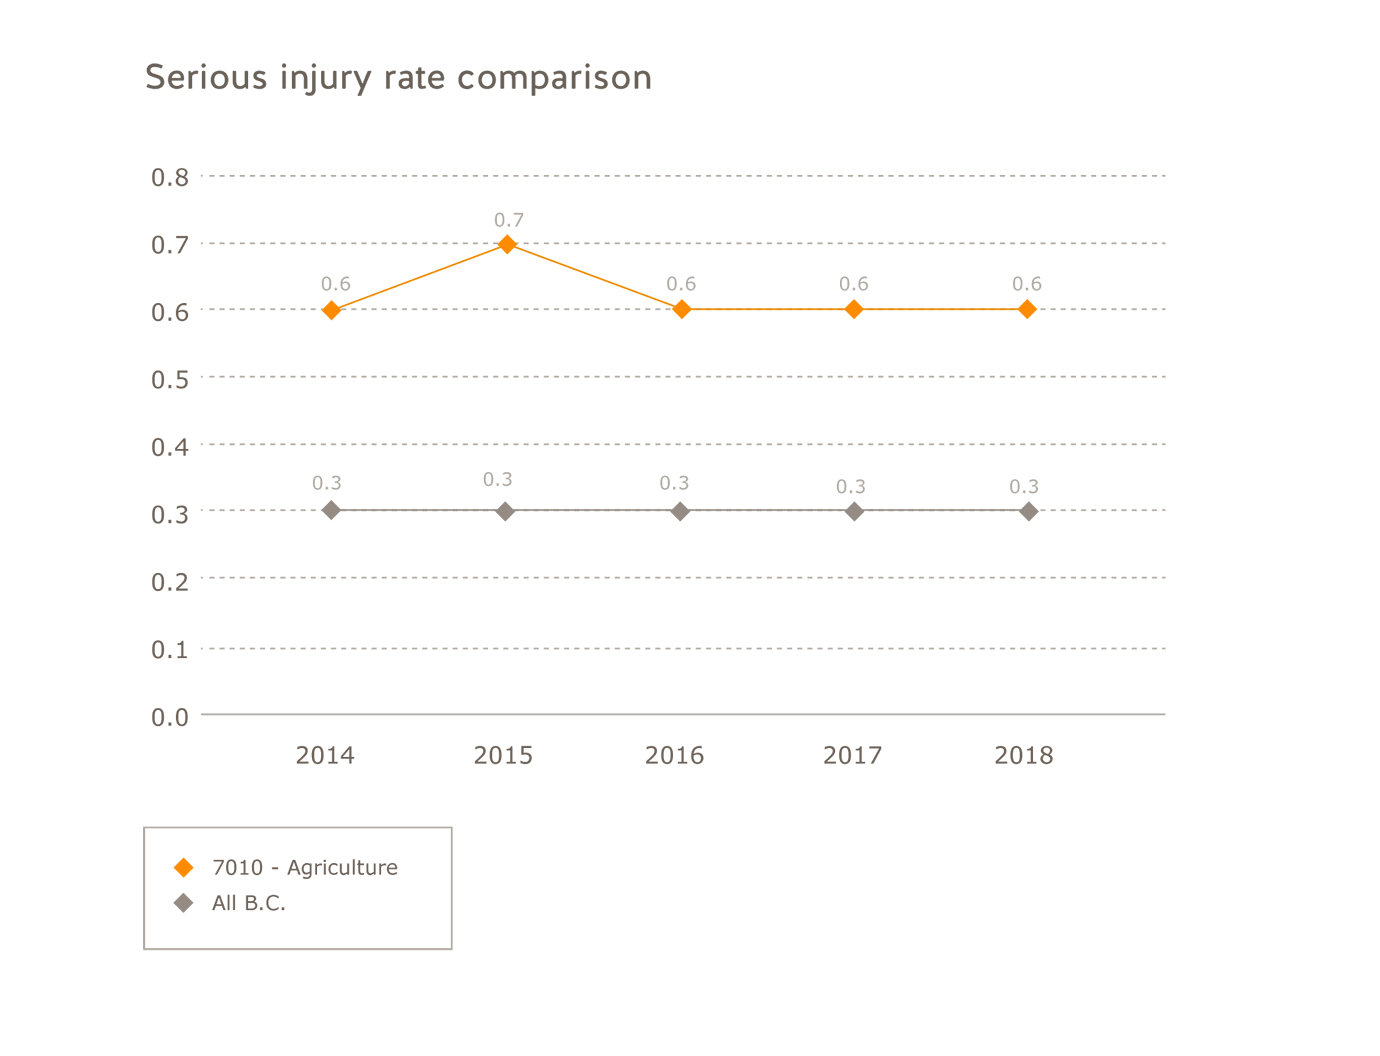 Agriculture serious injury rate comparison for the years 2014 to 2018. All B.C.=2014=0.3; 2015=0.3; 2016=0.3; 2017=0.3; 2018=0.3. Agriculture=2014=0.6; 2015=0.7; 2016=0.6; 2017=0.6; 2017=0.6.